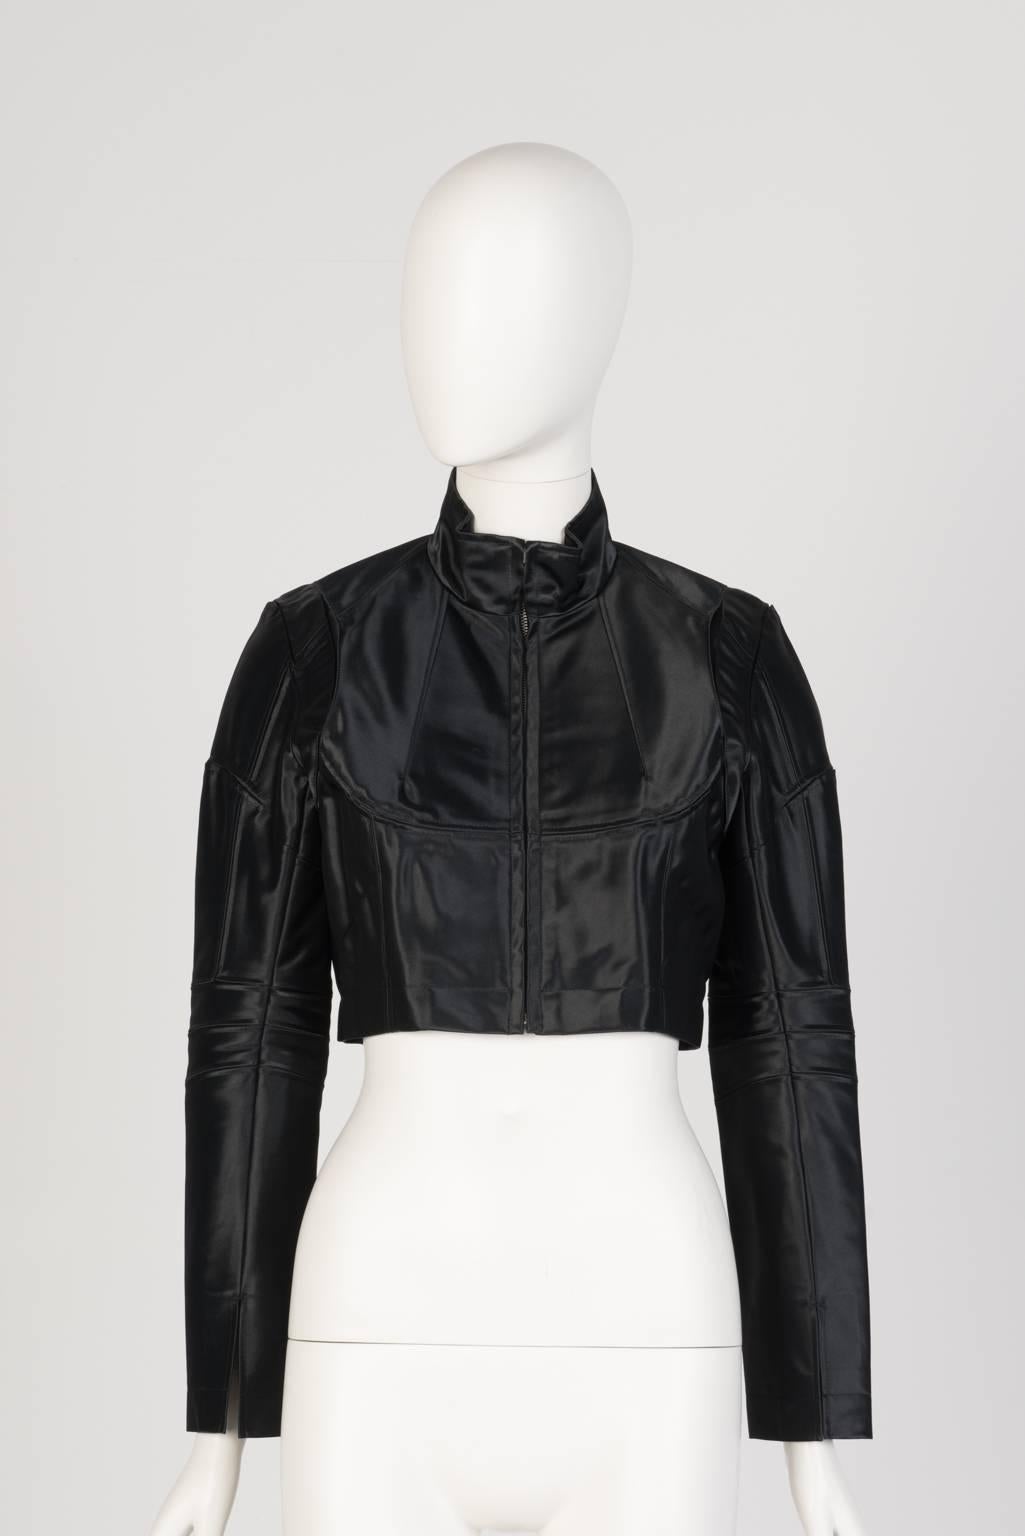 Fitted, high waist, nylon moto jacket with satin-like sheen, zip front, slit cuffs, and  complex seaming detail.